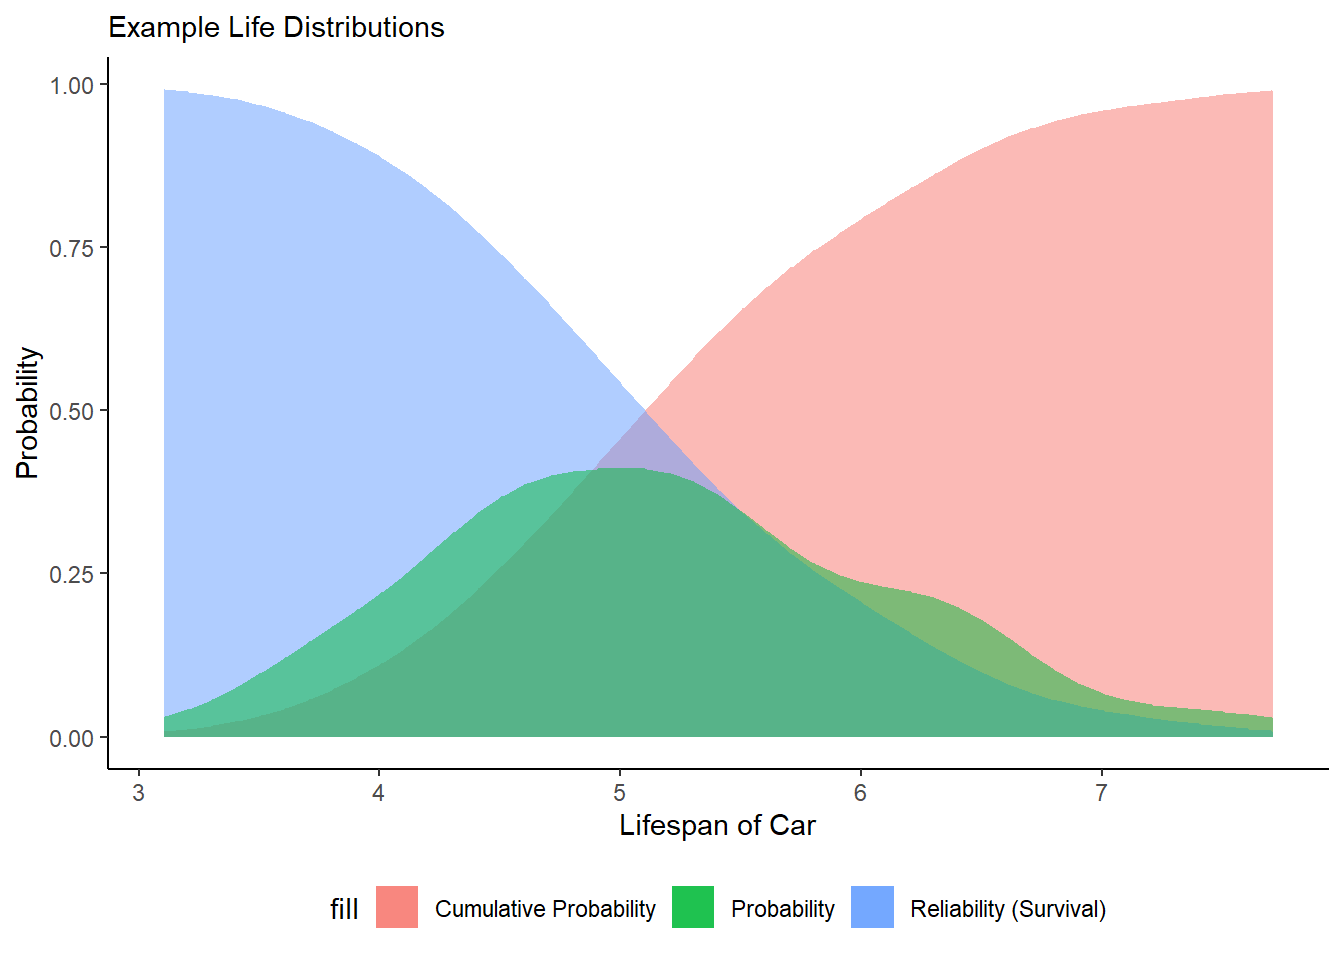 Figure 2. Life Distributions of a Fleet of Cars